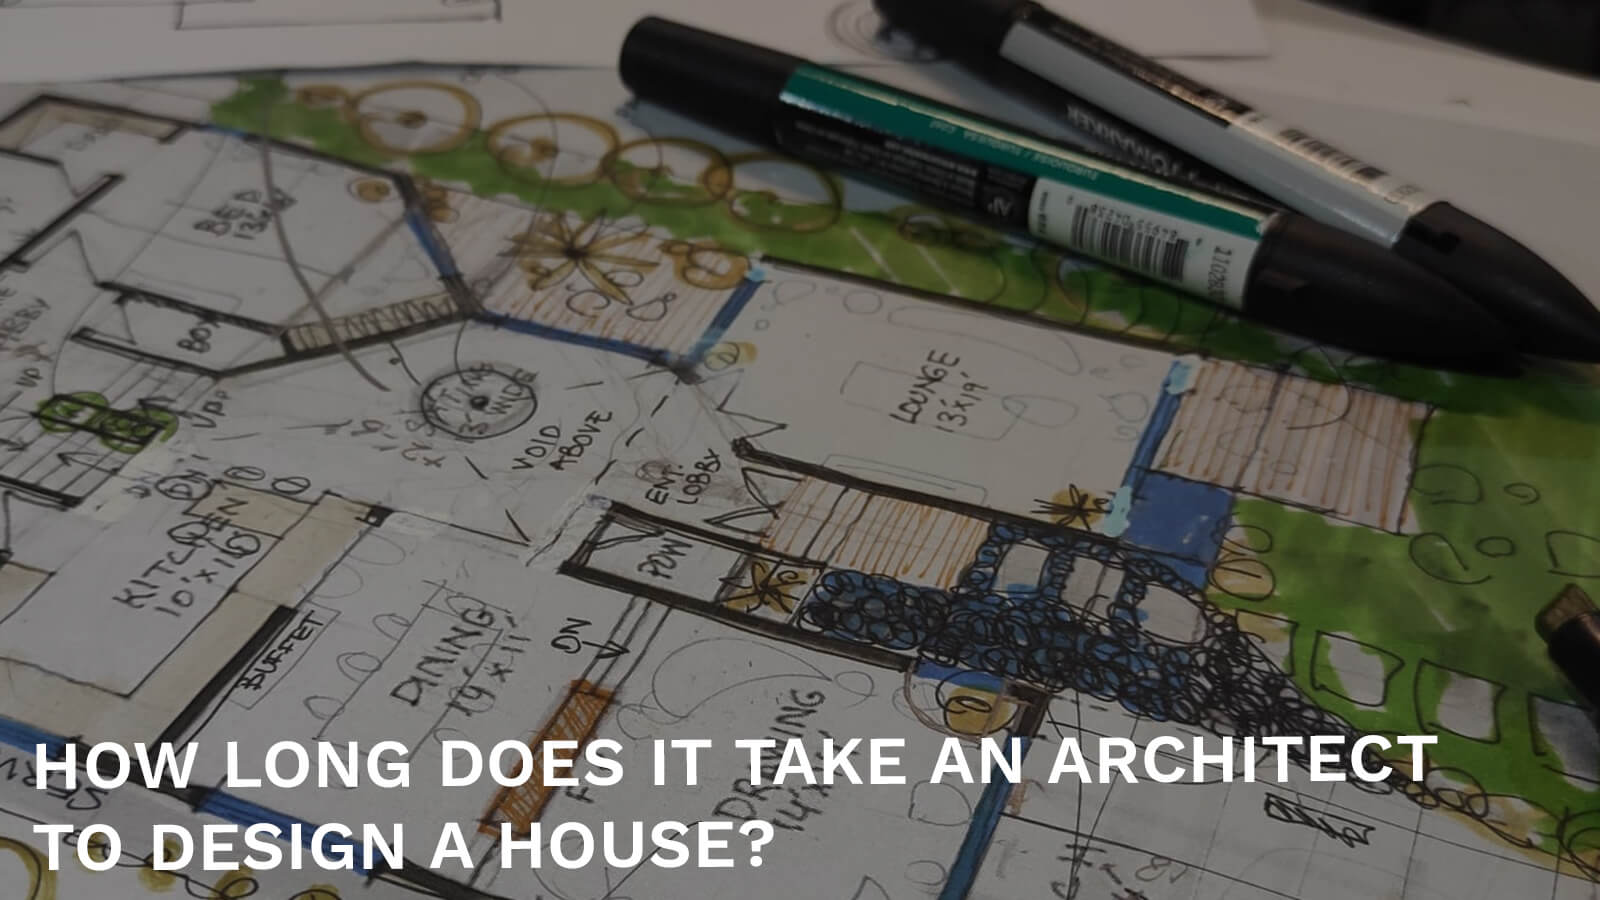 Architect designs floor plans and house exterior